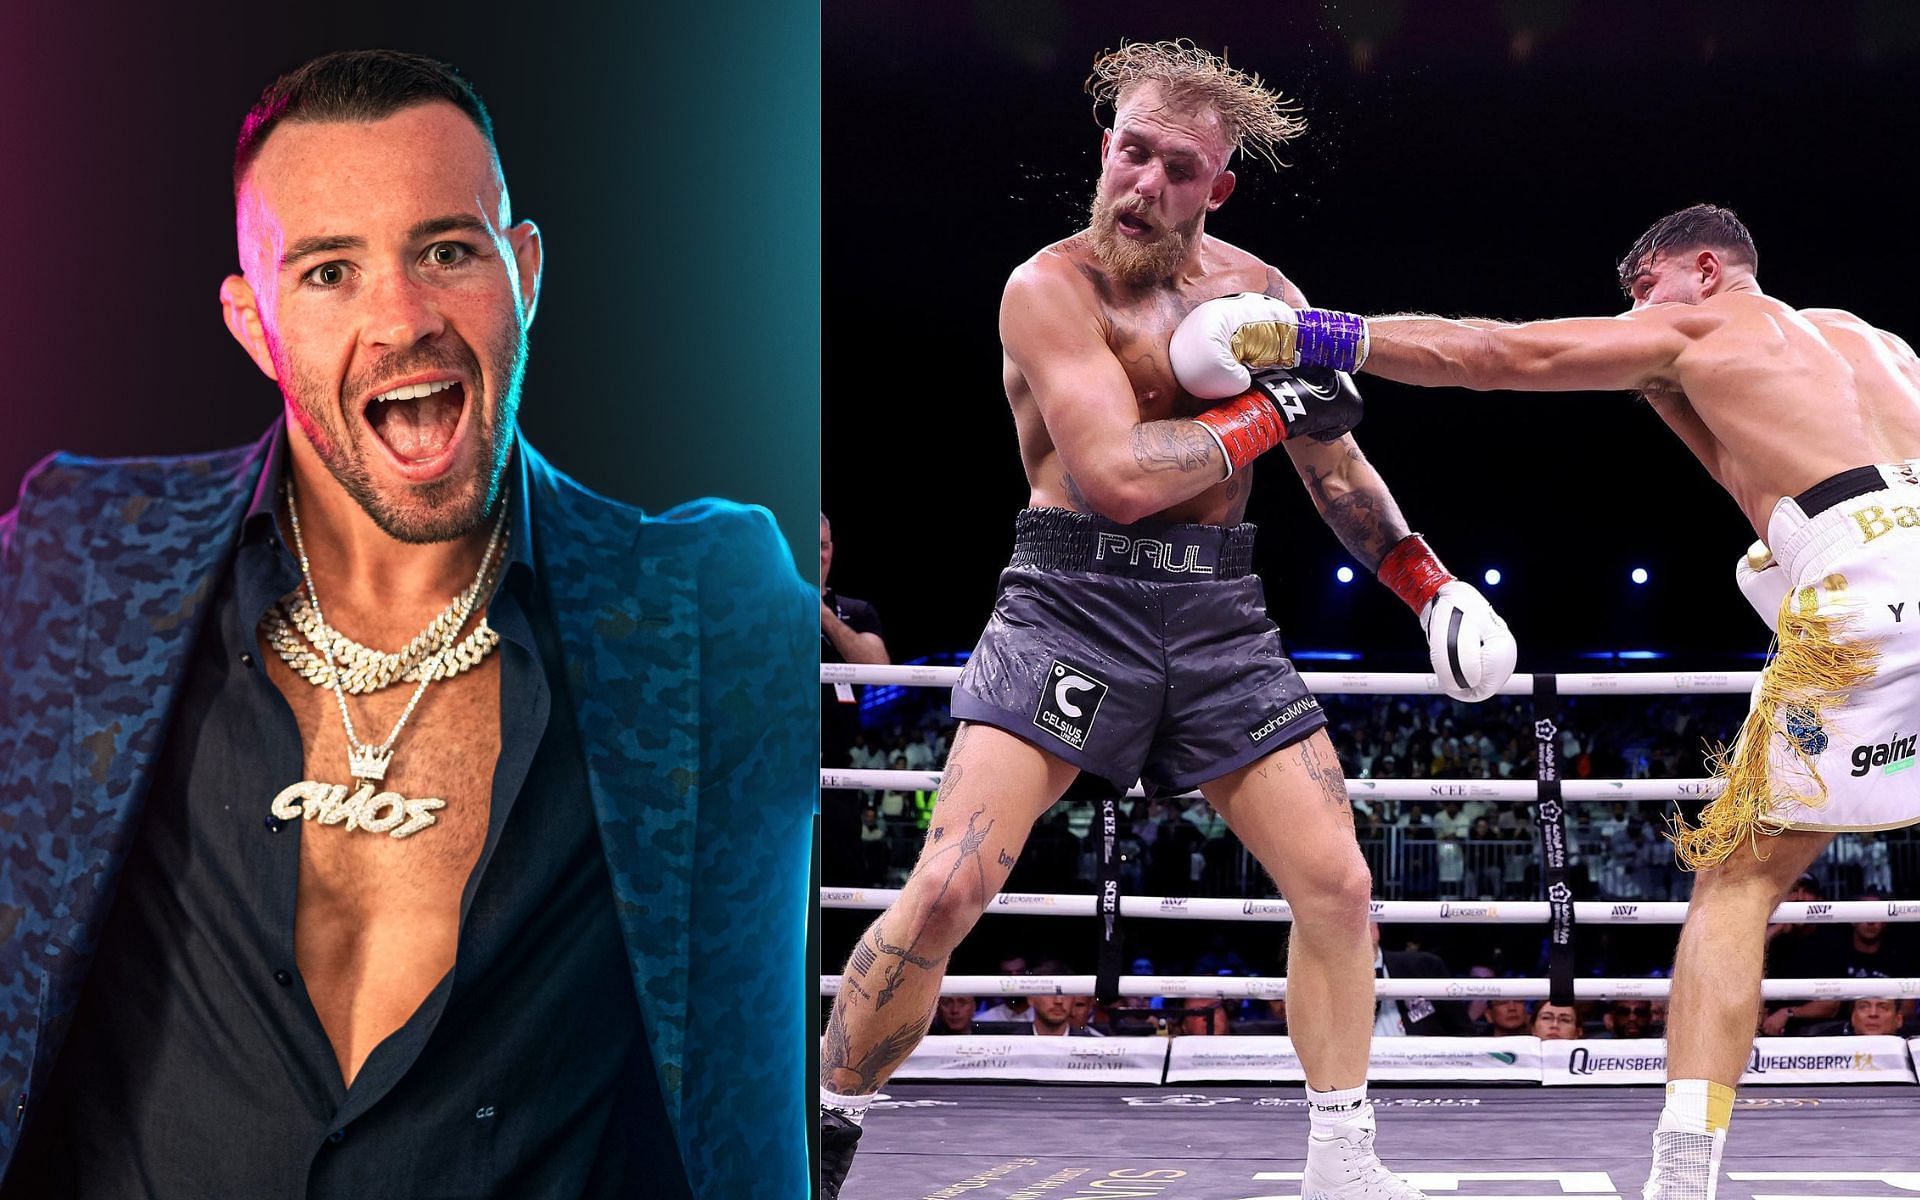 Colby Covington [Left] Jake Paul vs. Tommy Fury [Right] [Images courtesy: @ufc (Twitter) and Bleacher Report (Facebook)]